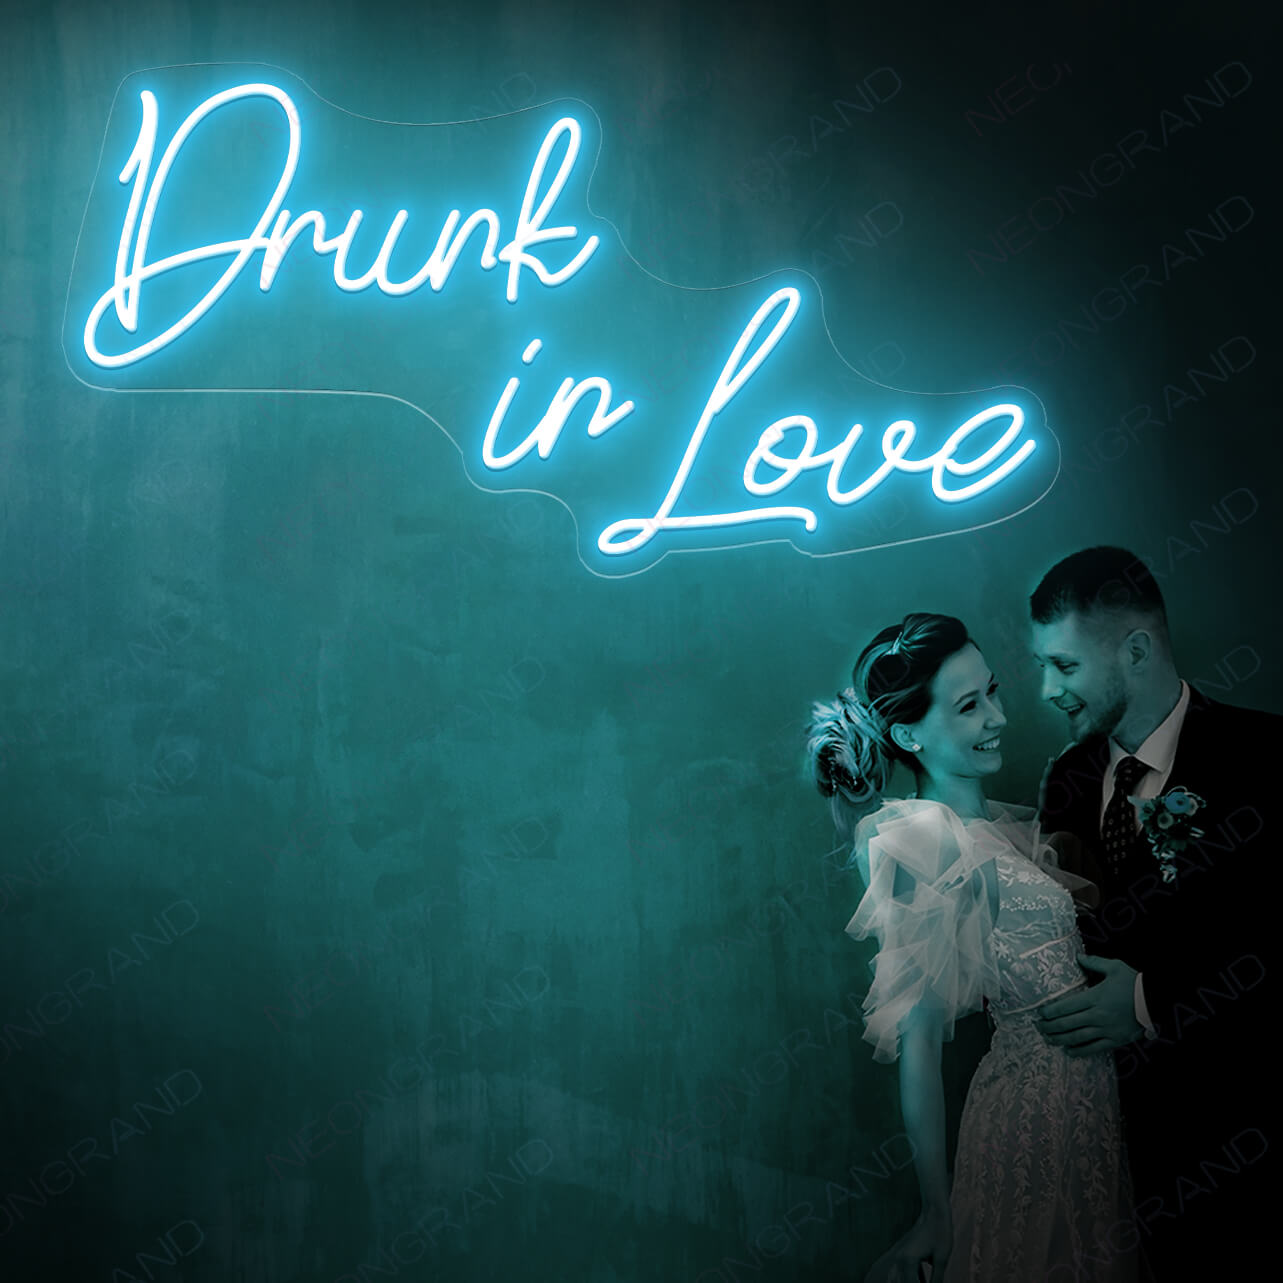 Drunk In Love Neon Sign Led Light Neon Love Sign SkyBlue